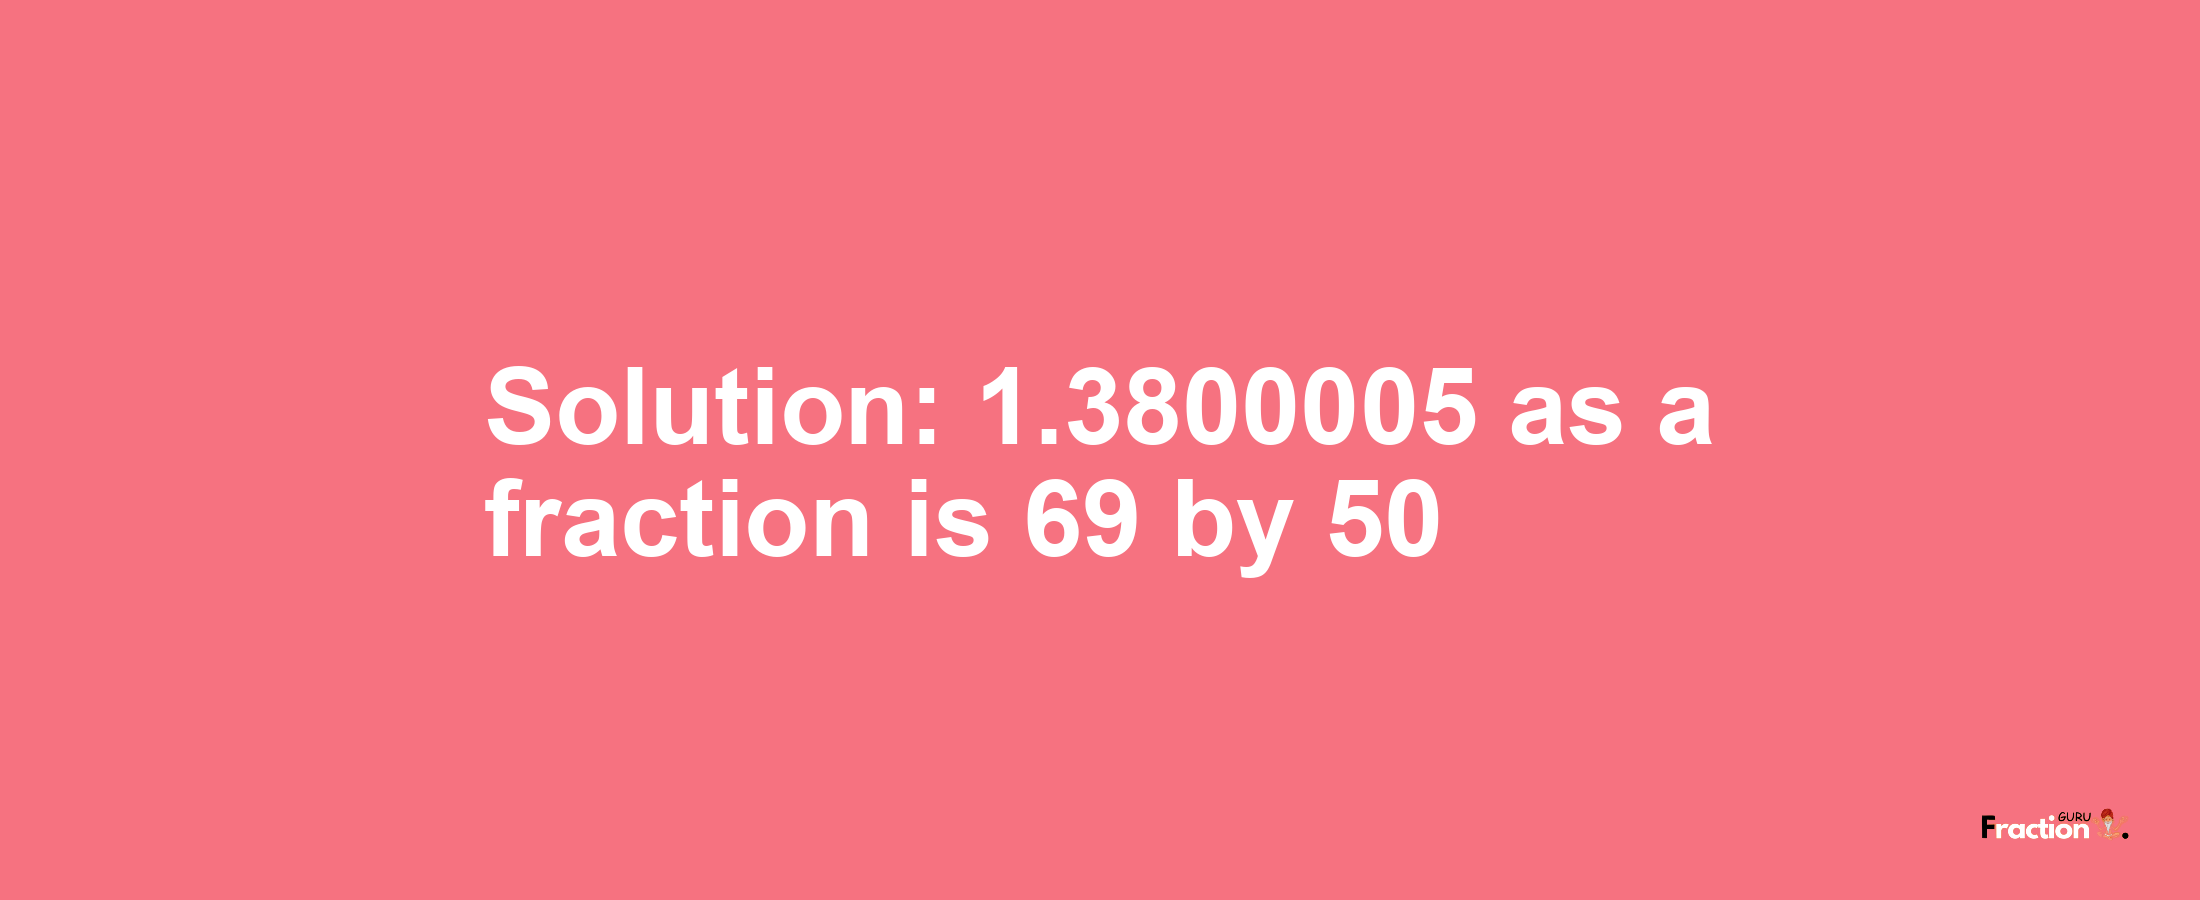 Solution:1.3800005 as a fraction is 69/50